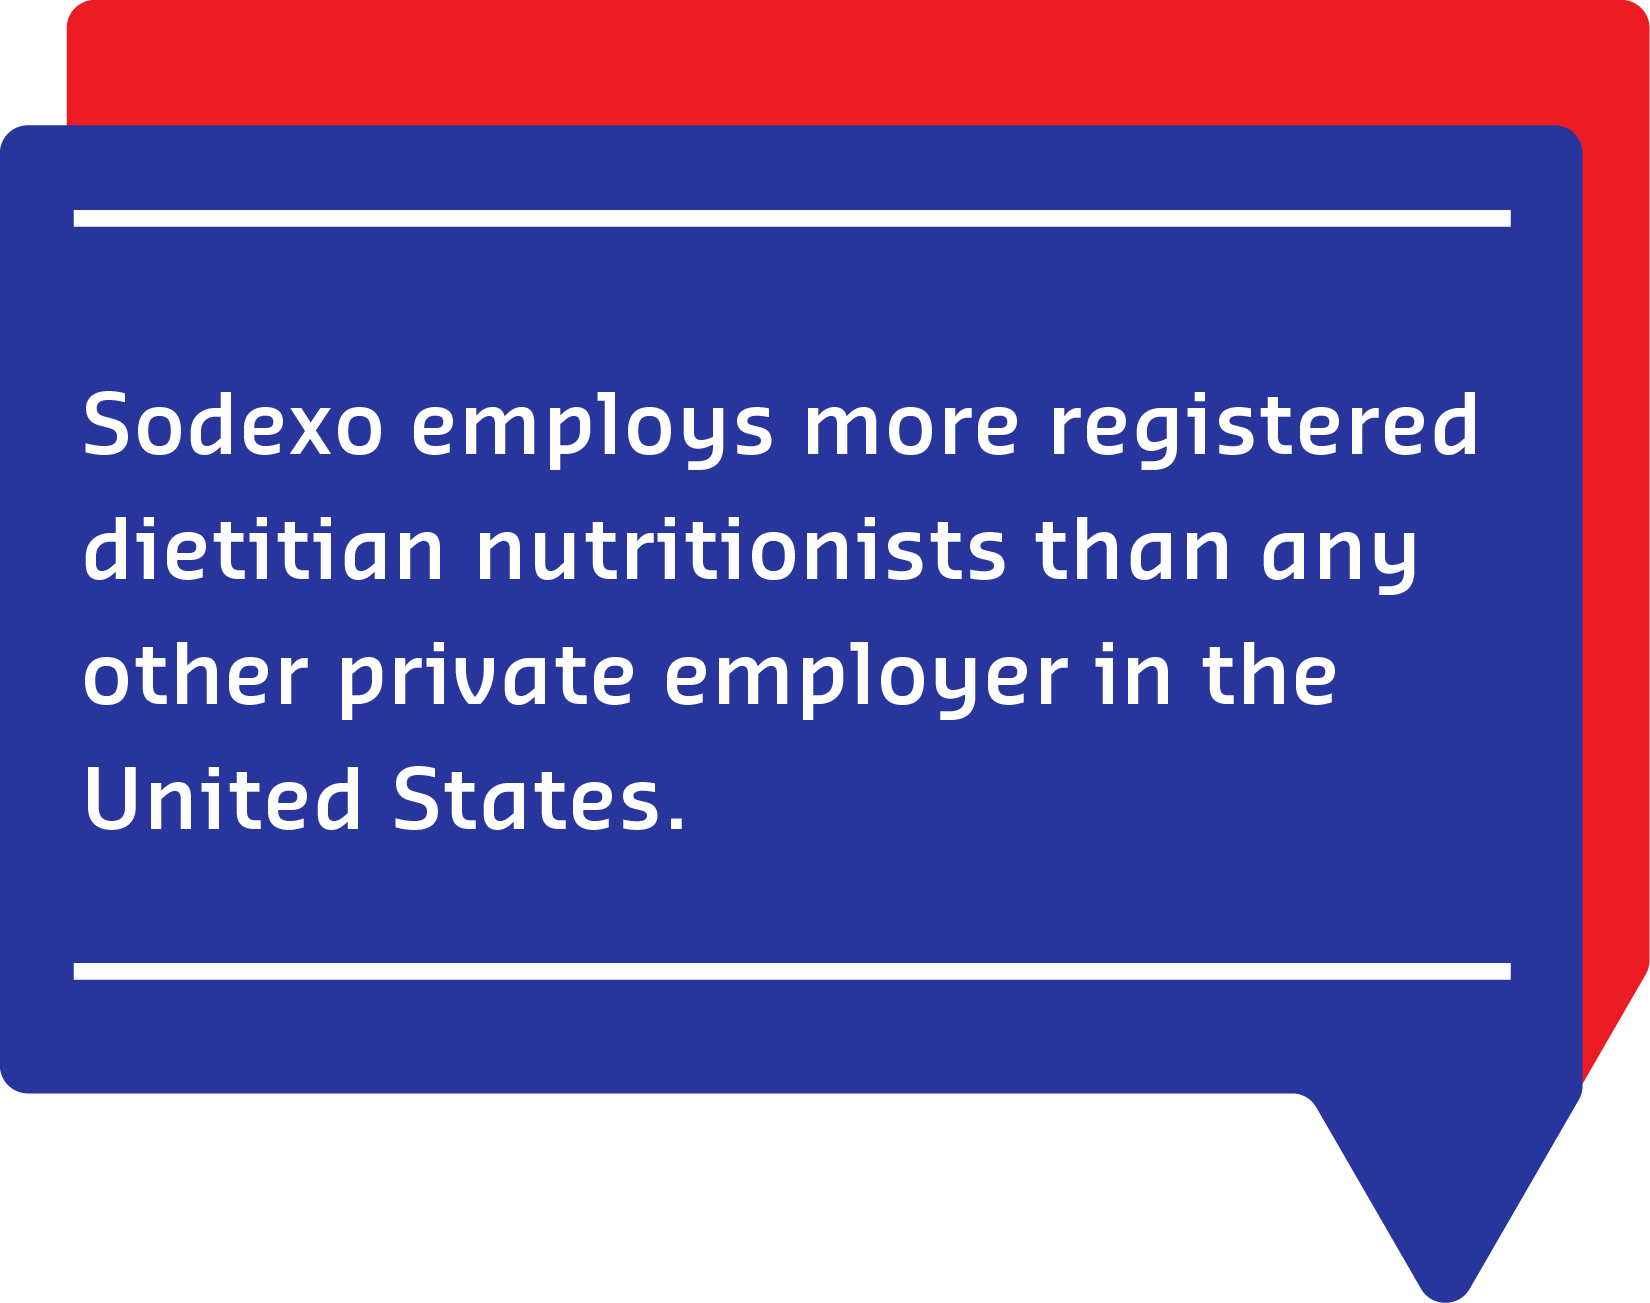 Sodexo employs more registered dietitian nutritionists than any other private employer in the United States.